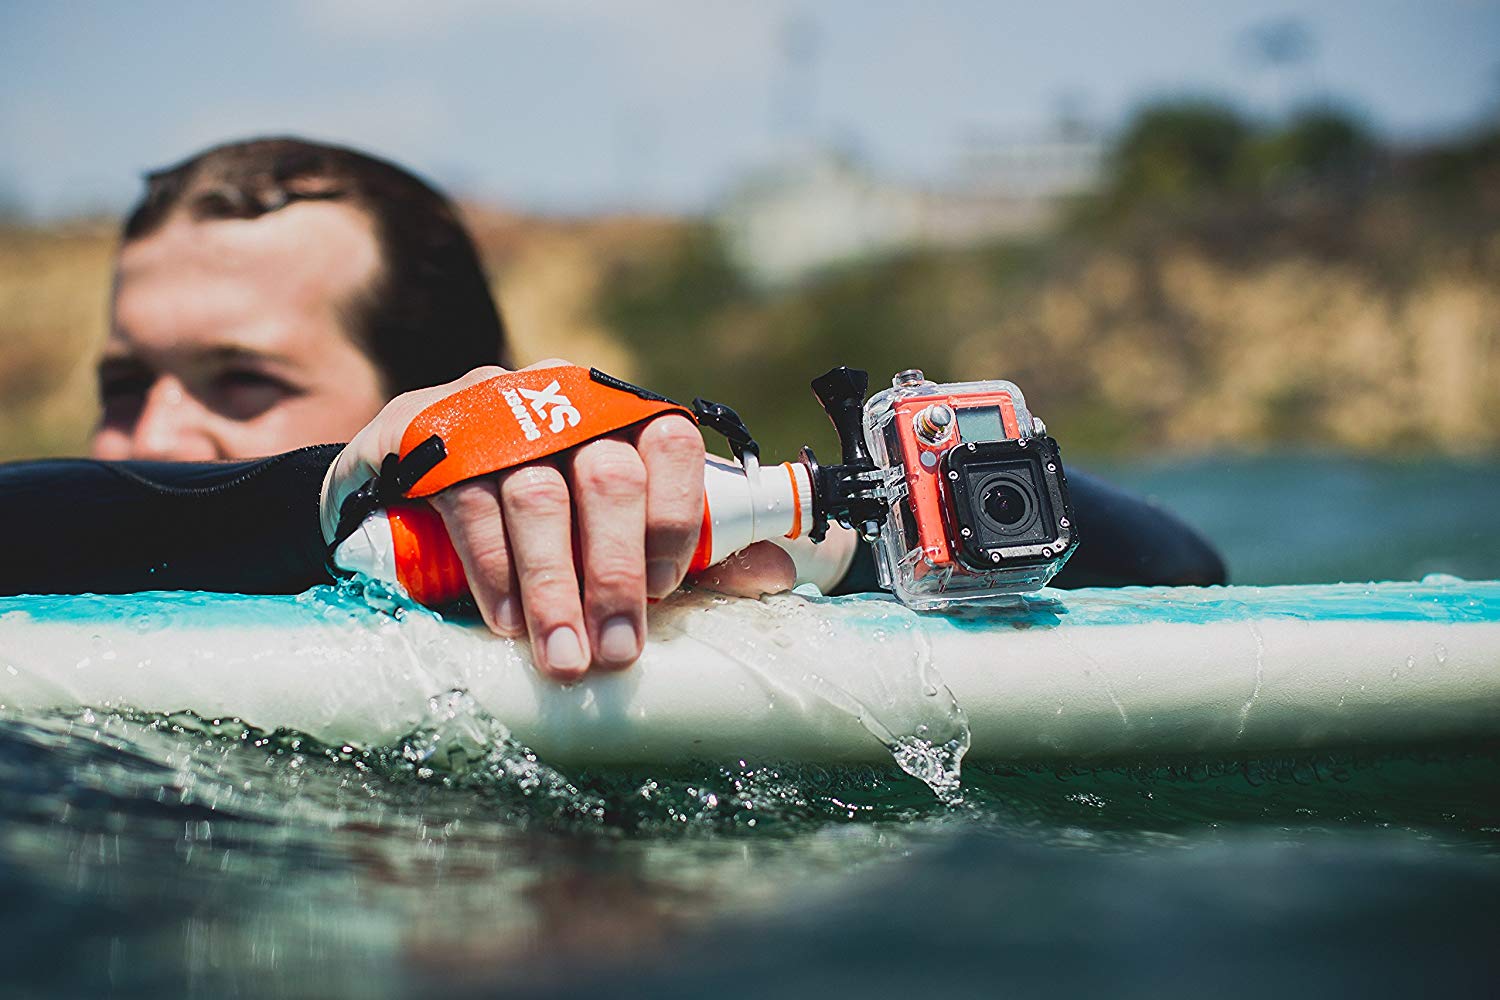 Our product in action with a GoPro black edition or a DJI Osmo Action camera. On the picture is a surfer in the water holding the surfboard and waiting waves. he is using our product, the U-Float, with the action camera that is floating on the surface of the water